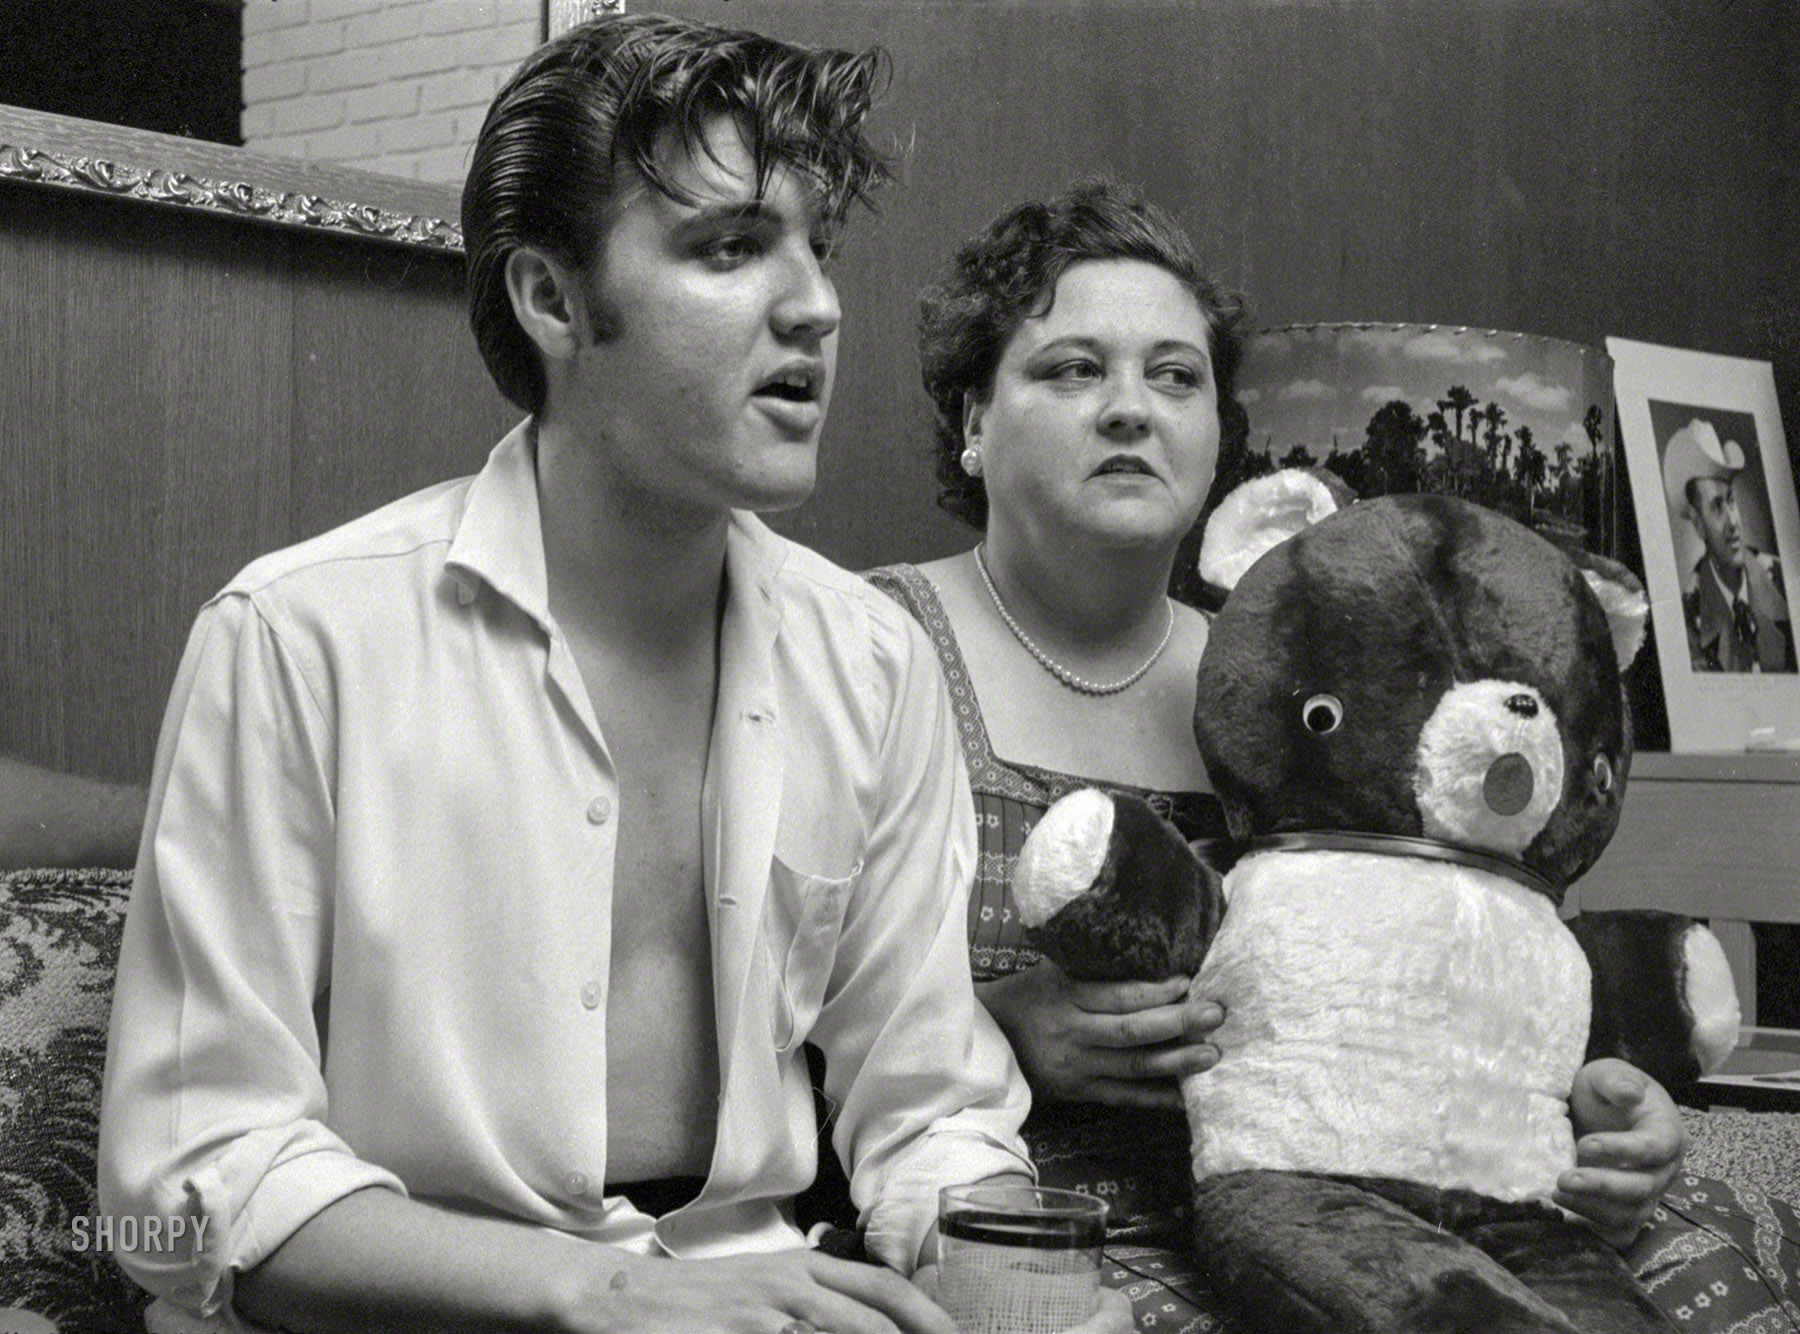 May 1956. Memphis, Tennessee. "Elvis Presley at home with his mother, Gladys." 35mm negative from photos by Philip Harrington for the Look magazine assignment "Elvis Presley -- He Can't Be, but He Is." View full size.